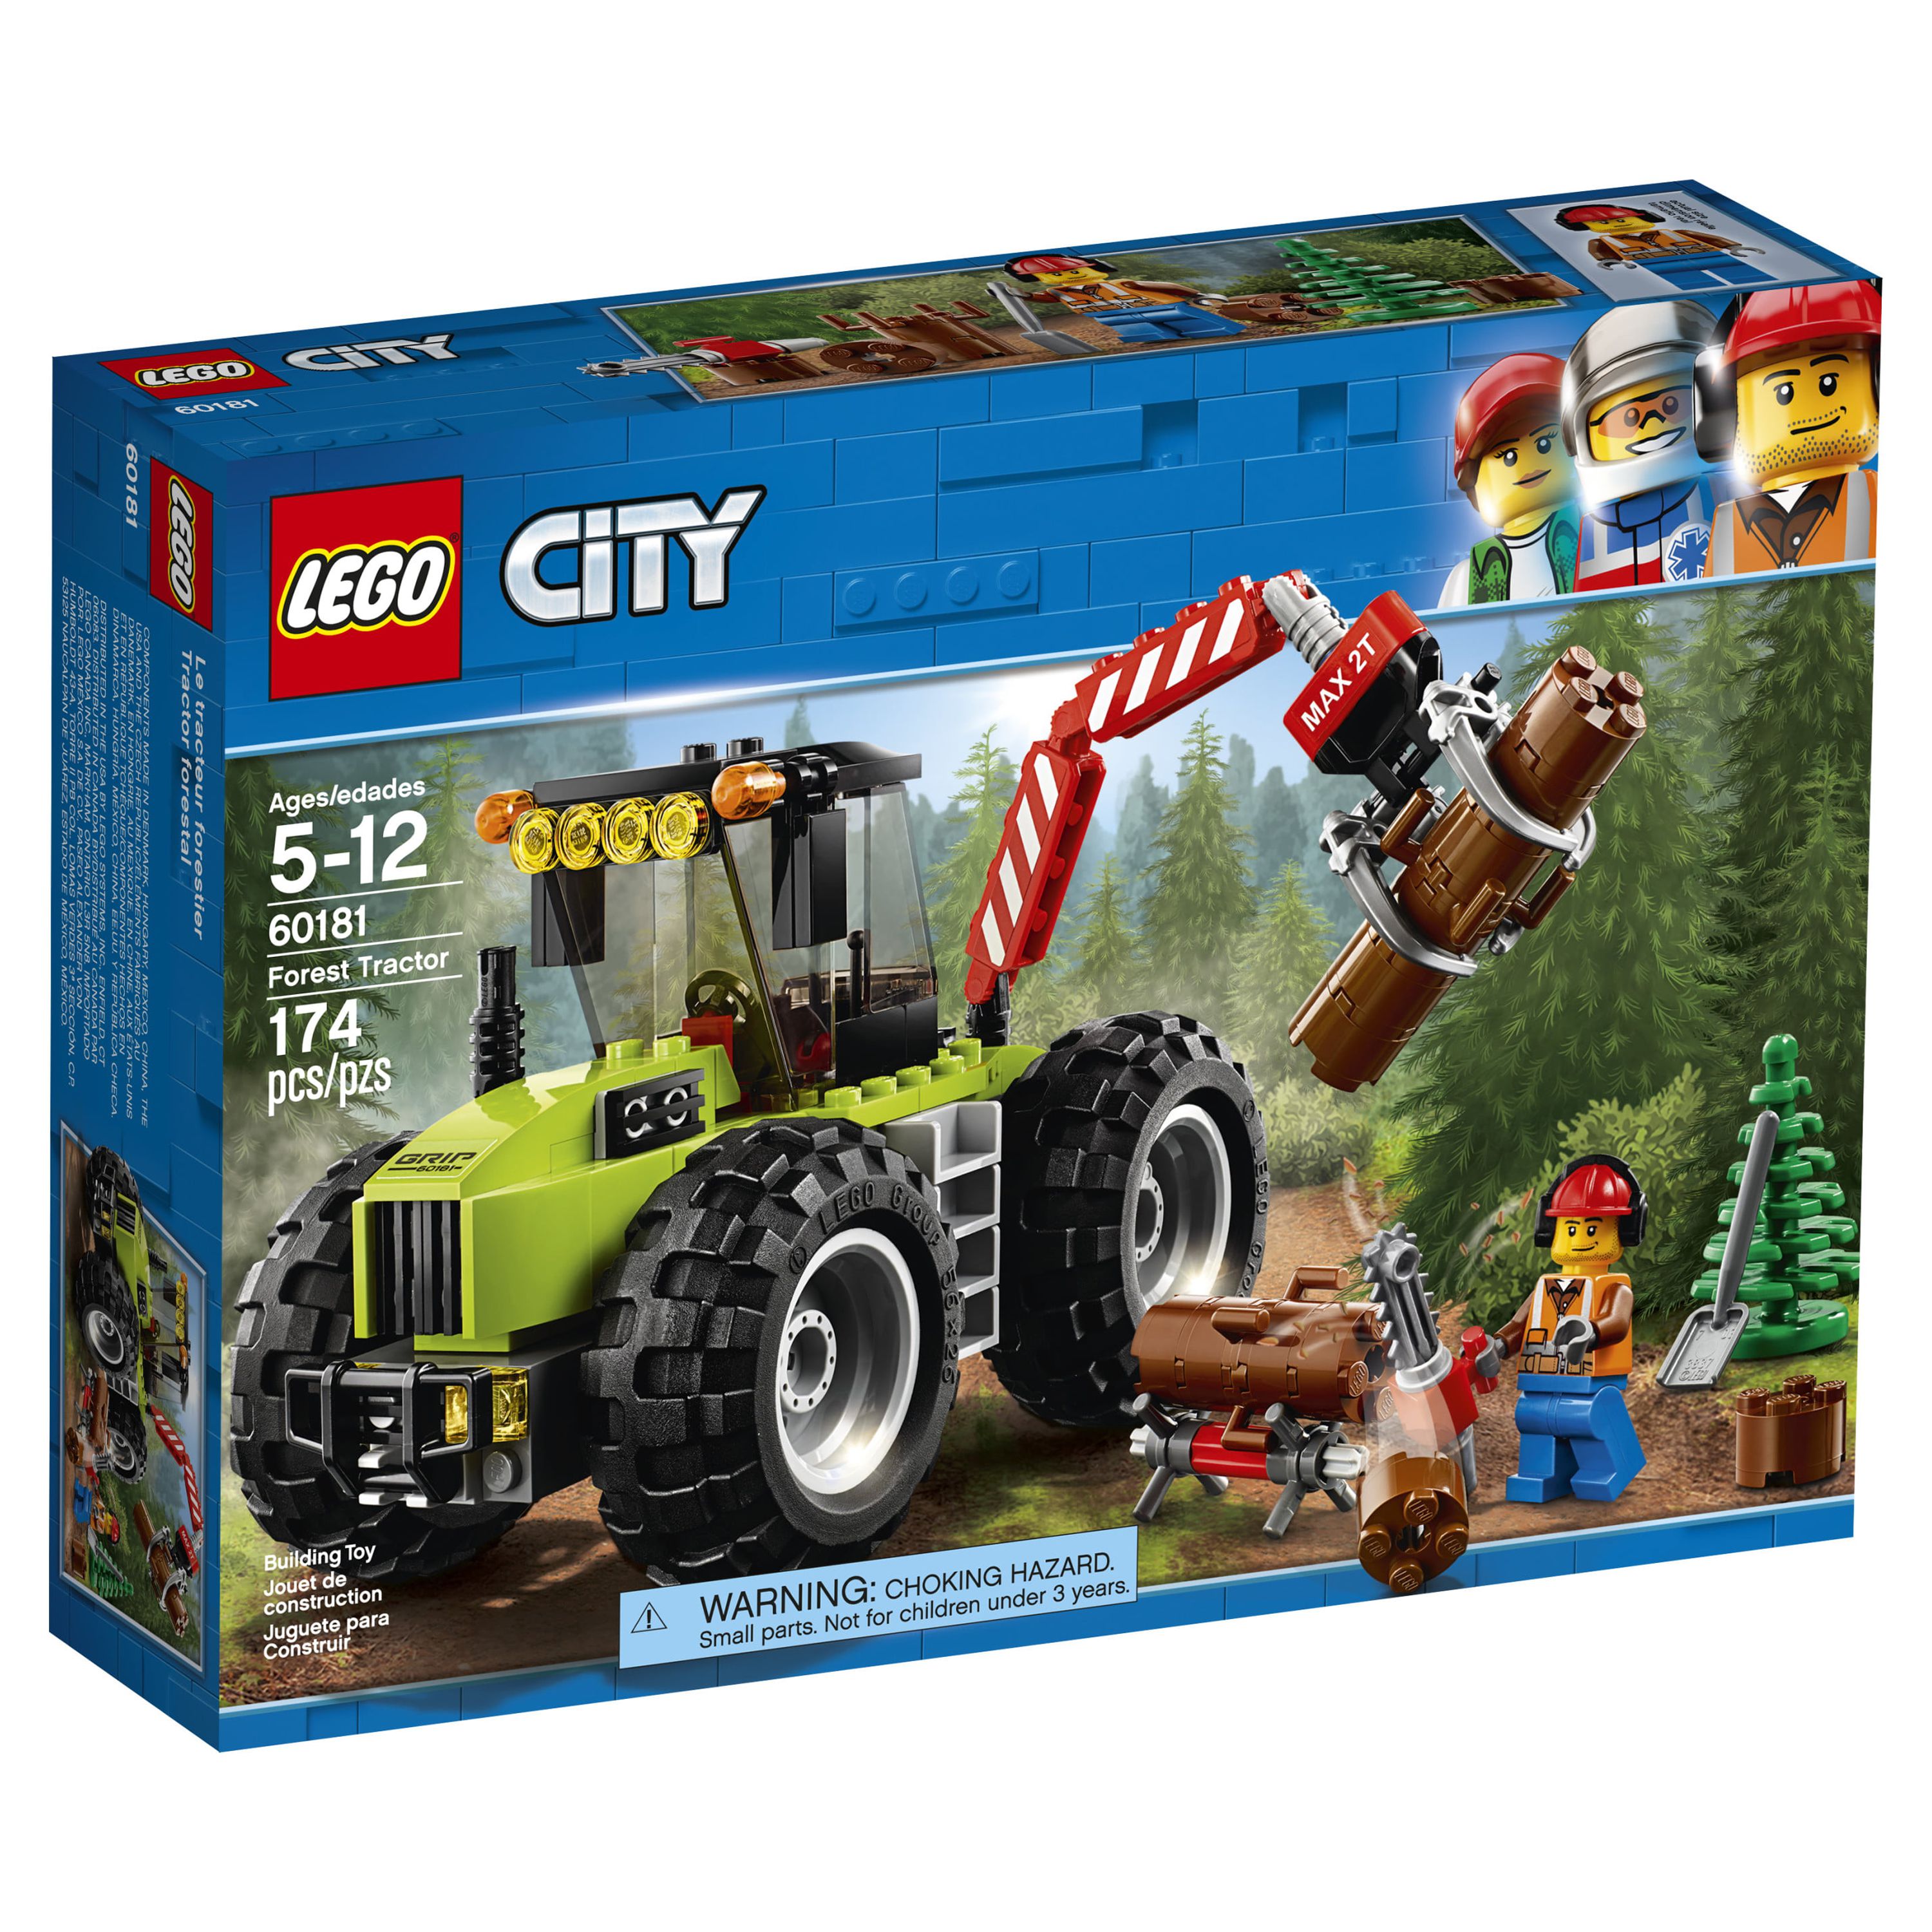 LEGO City Great Vehicles Forest Tractor 60181 - image 4 of 5